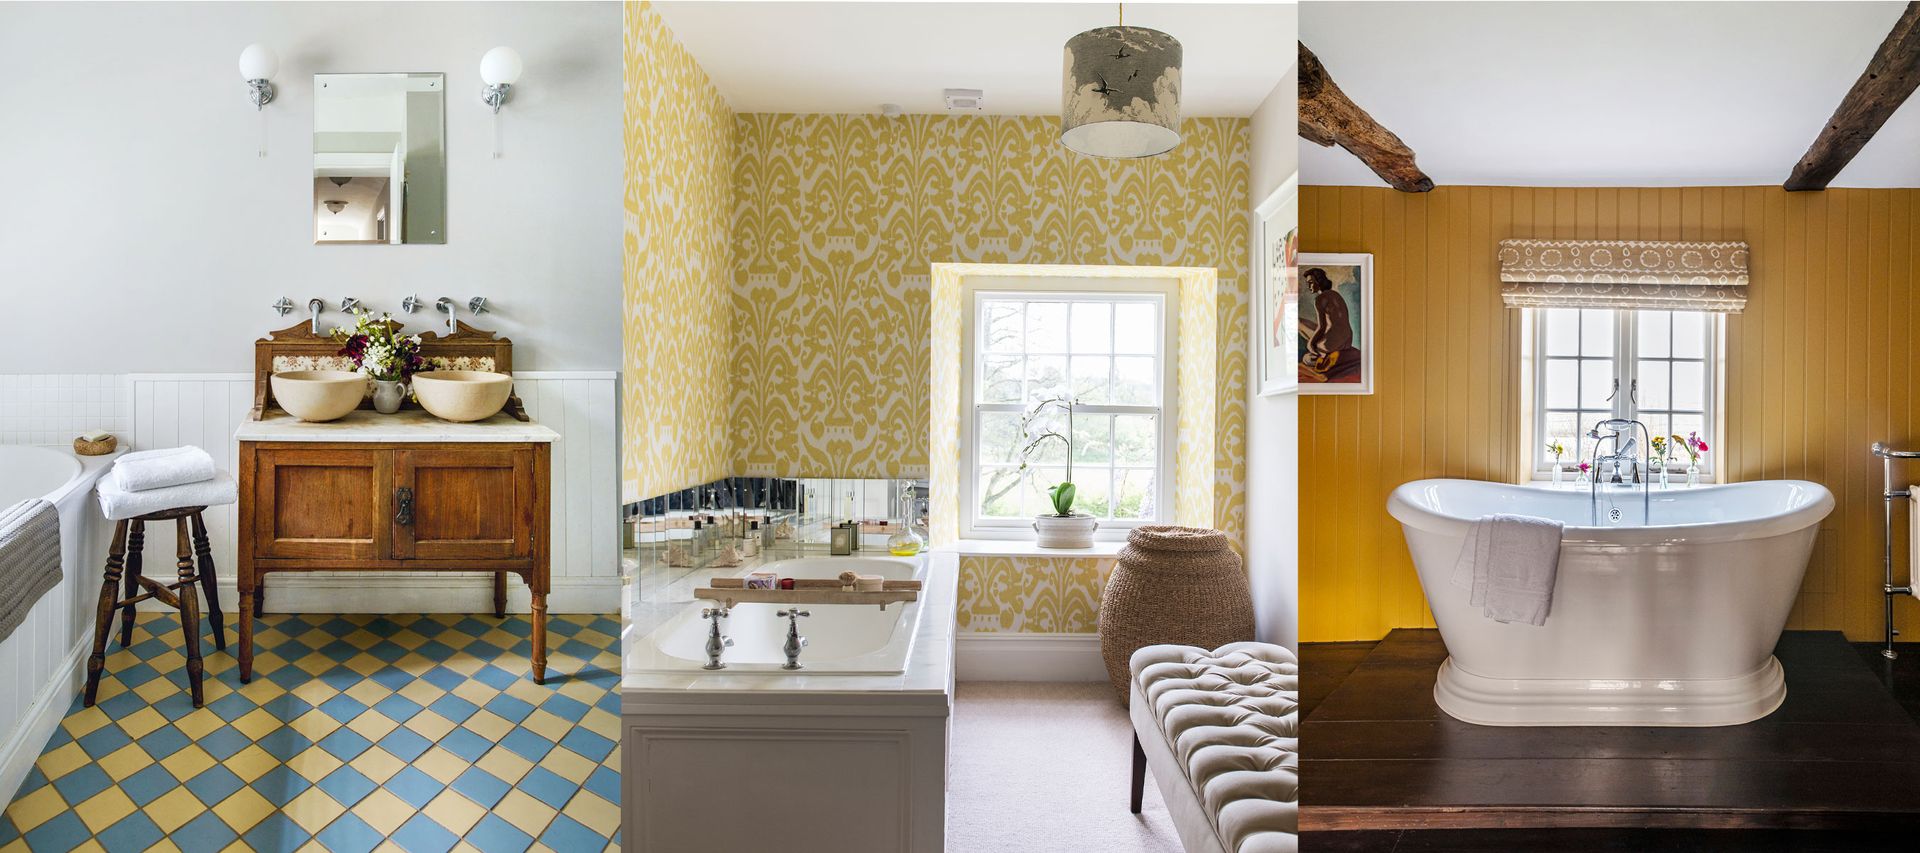 Yellow bathroom ideas: 10 yellow color schemes for bathrooms | Homes ...